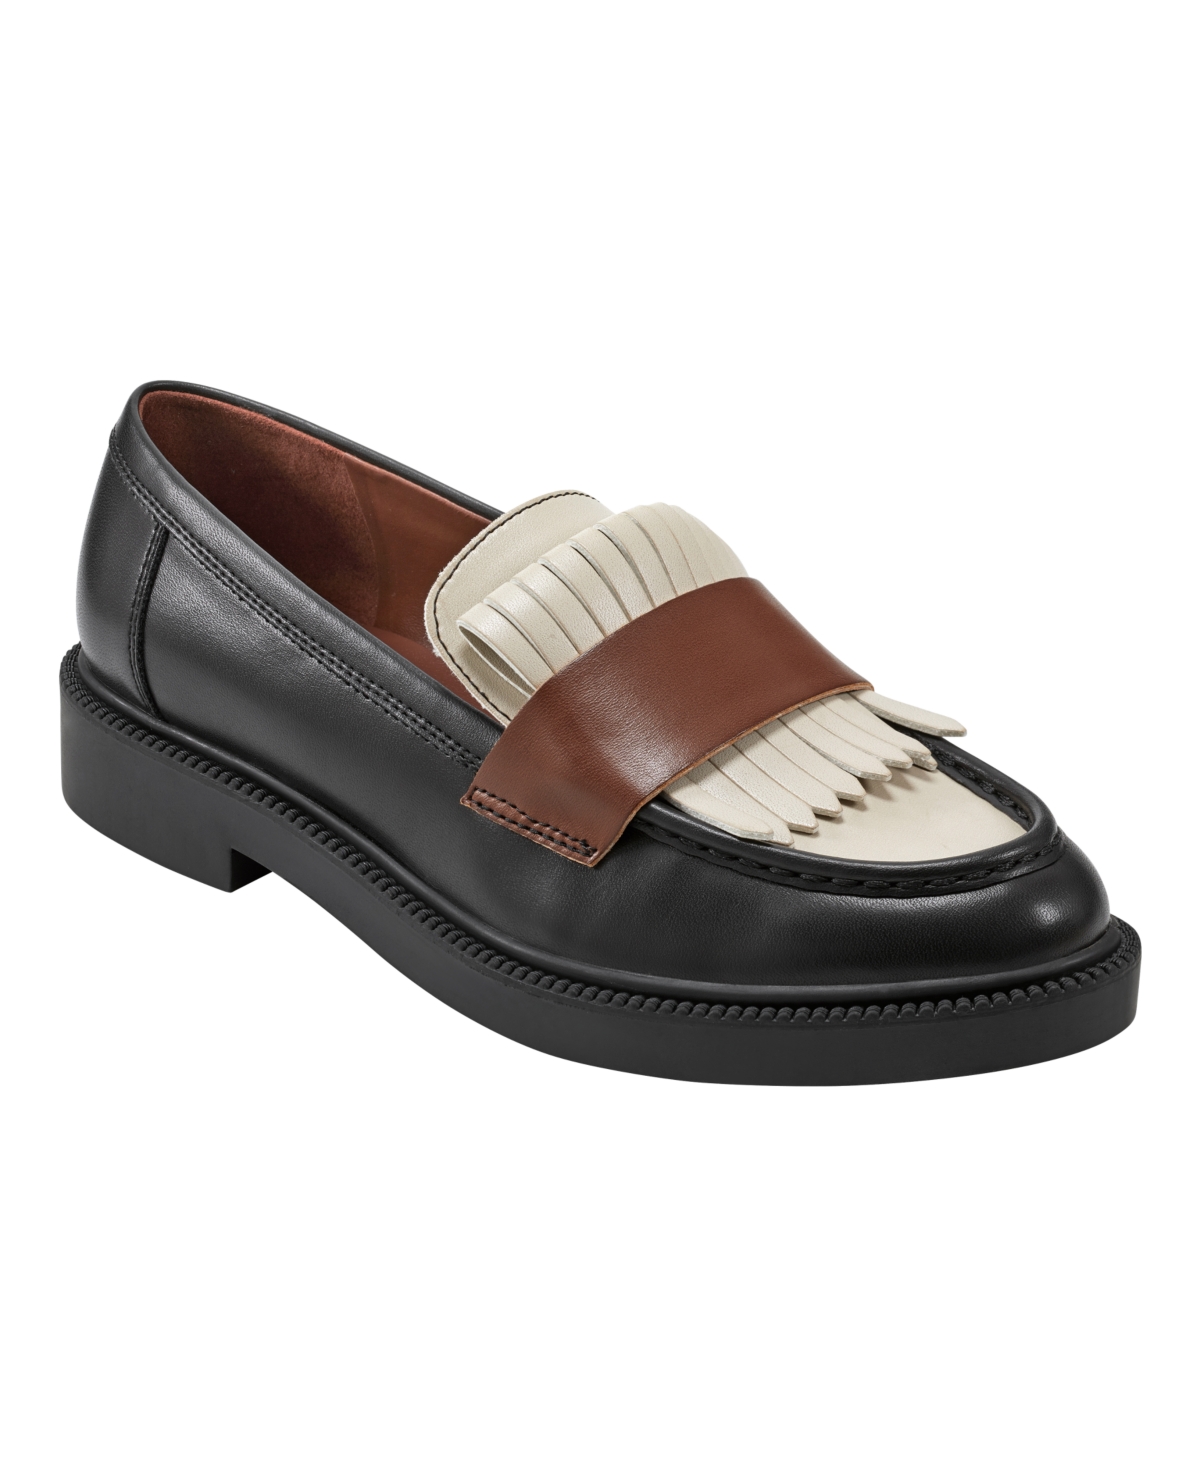 Women's Calixy Almond Toe Slip-on Casual Loafers - White Patent - Faux Patent Leather